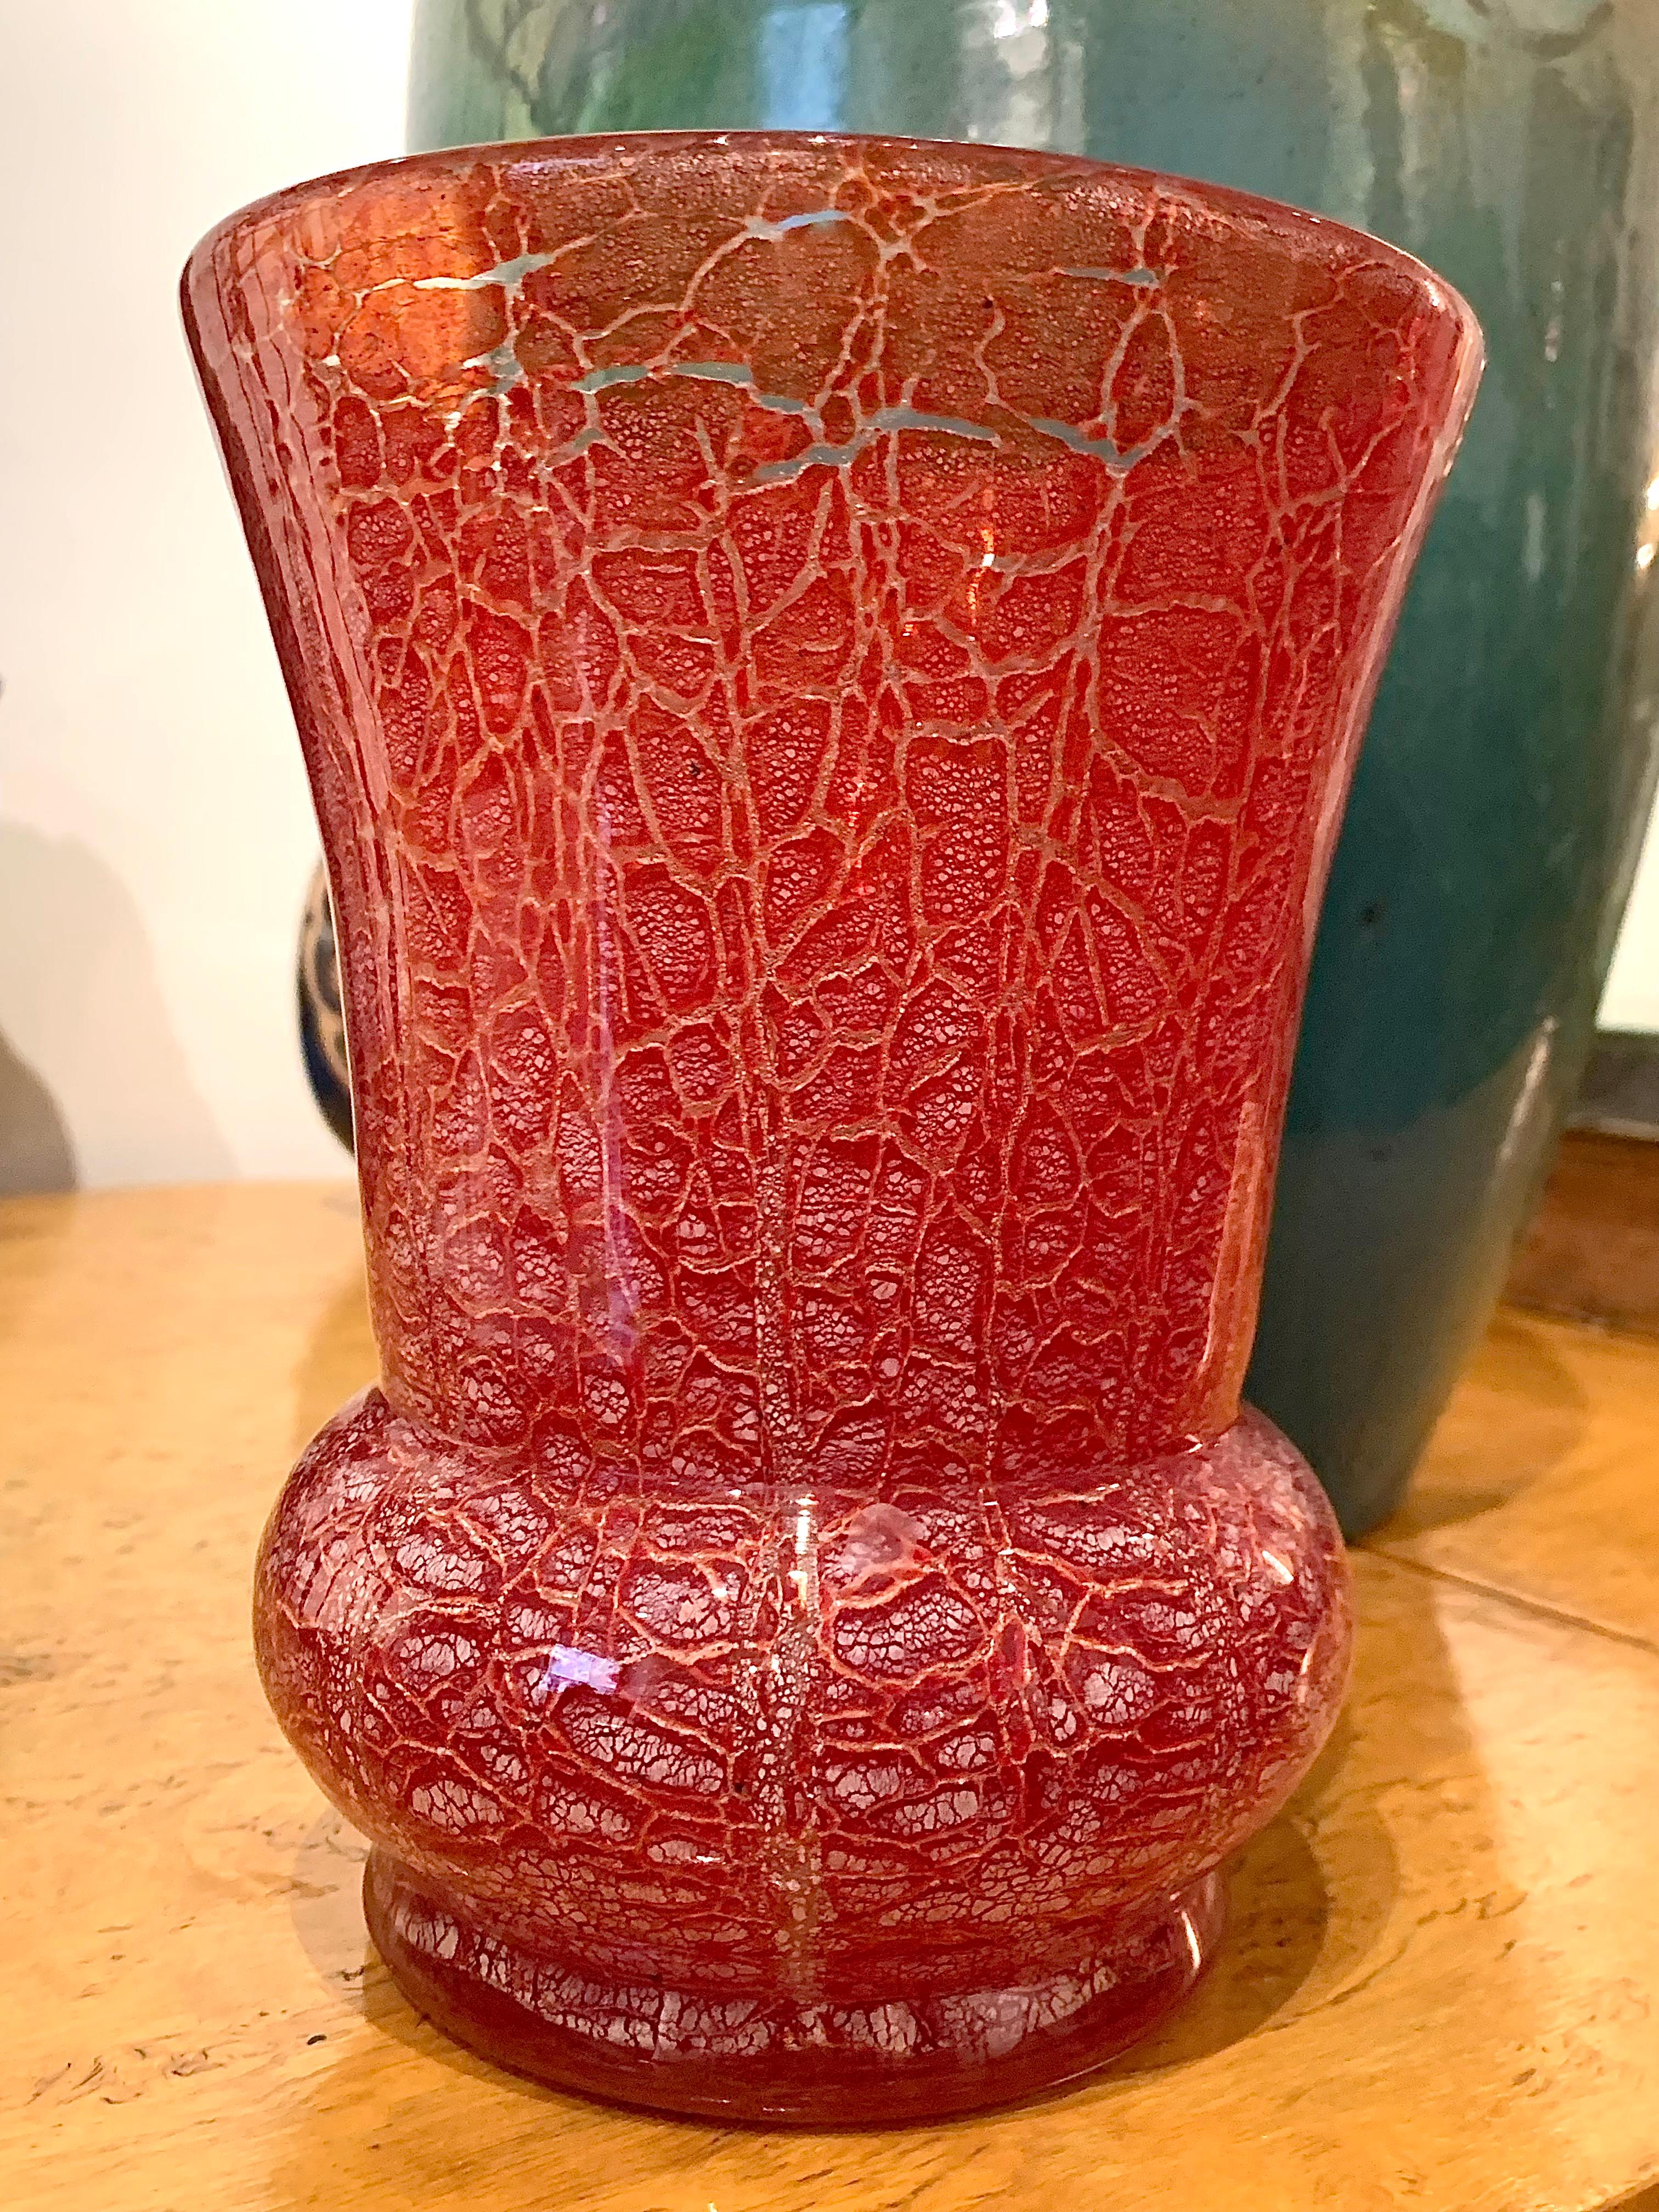 Mid-20th Century Art Deco Glass Vase Karl Wiedmann For WMF Red Glass With Silver Foil Inclusions For Sale